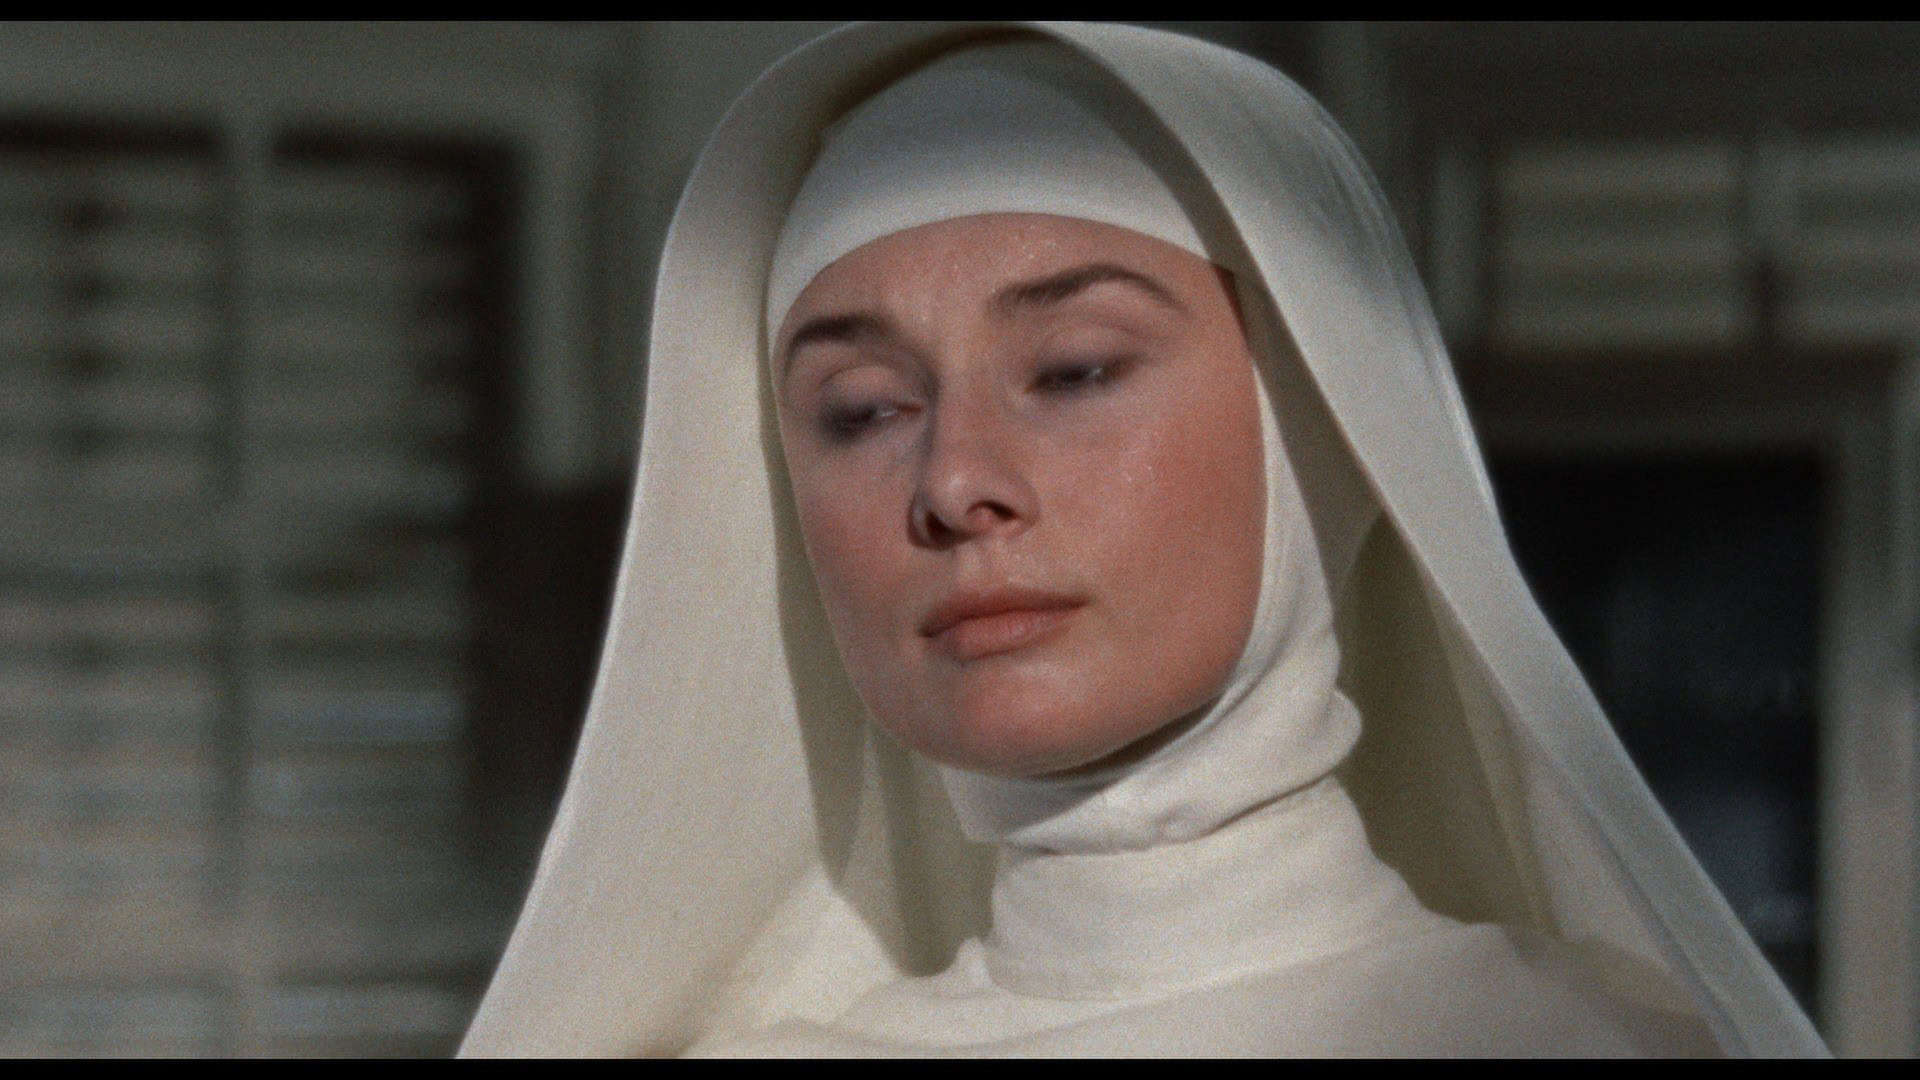 The Nun's Story (1959) [Warner Archive Blu-ray review] 1